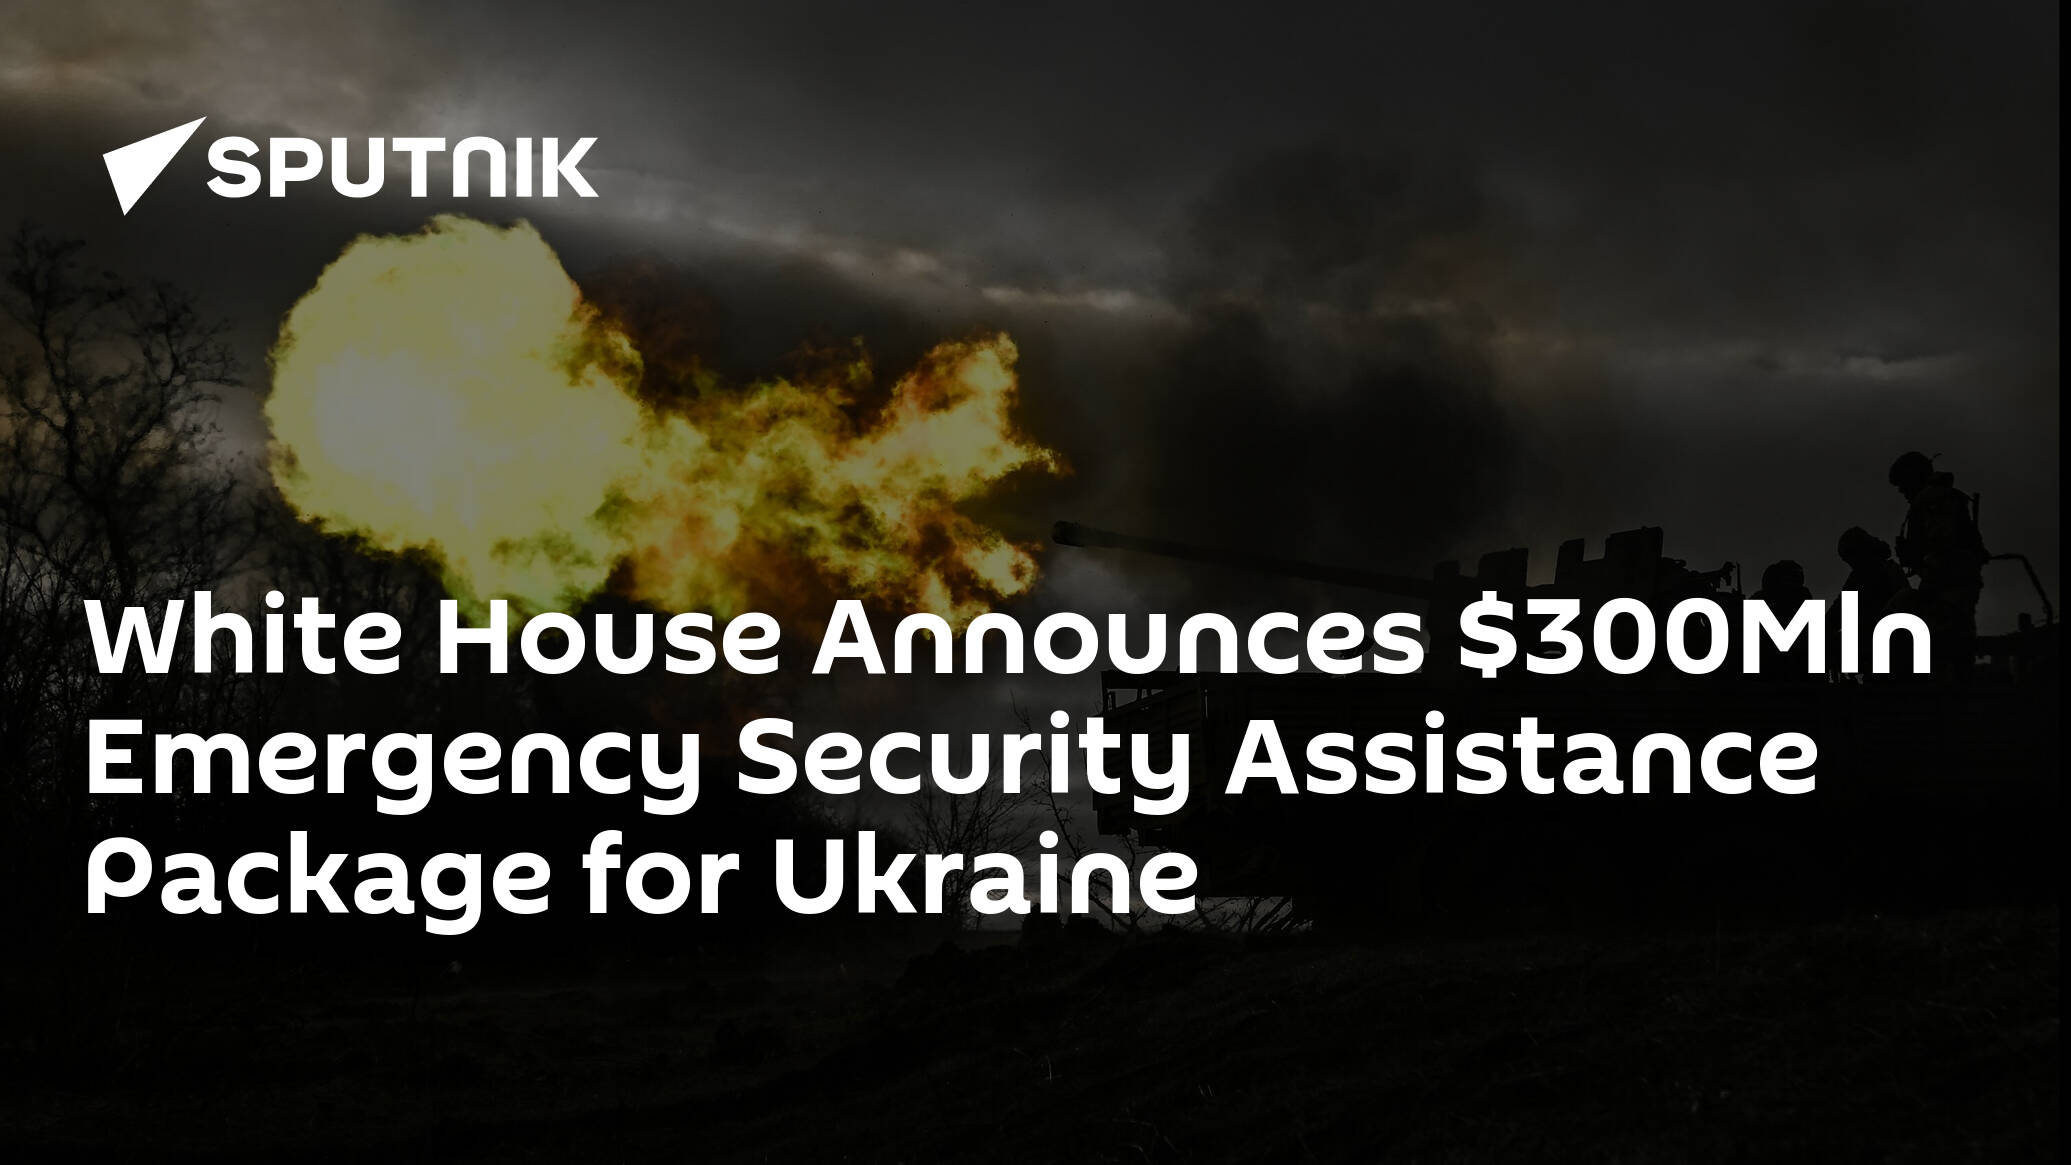 White House Announces 0Mln Emergency Security Assistance Package for Ukraine